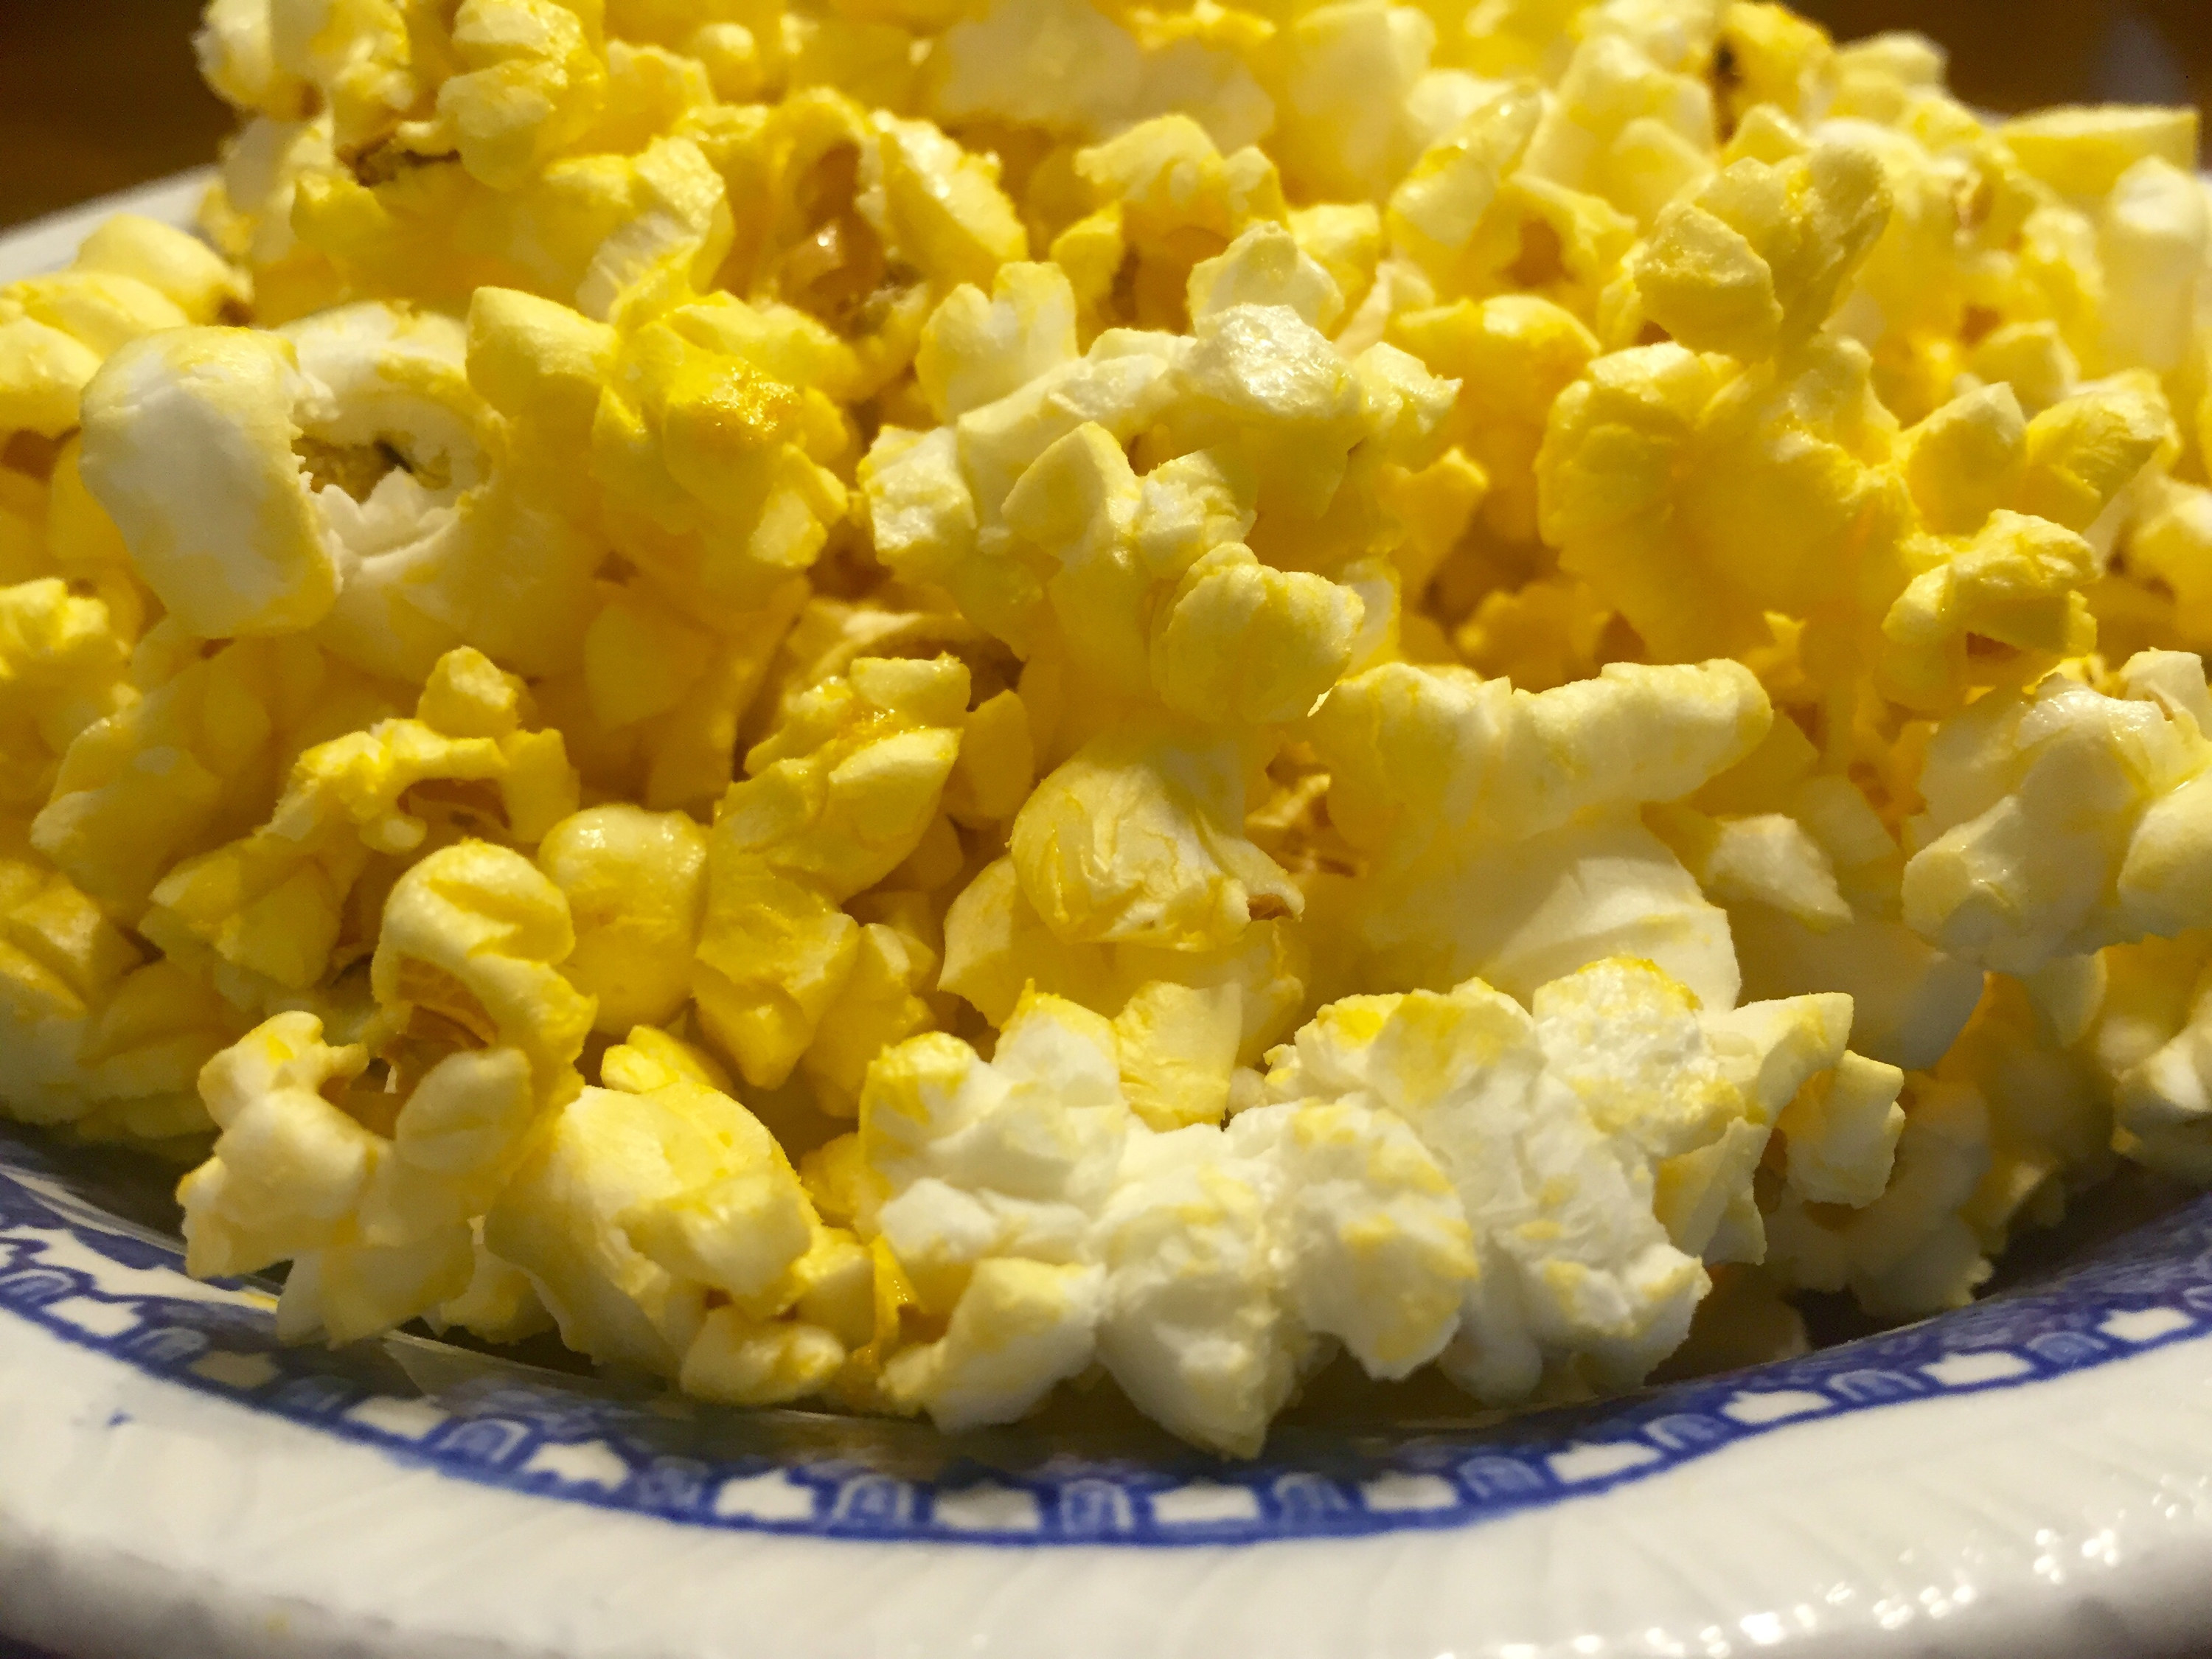 A plate of buttered popcorn